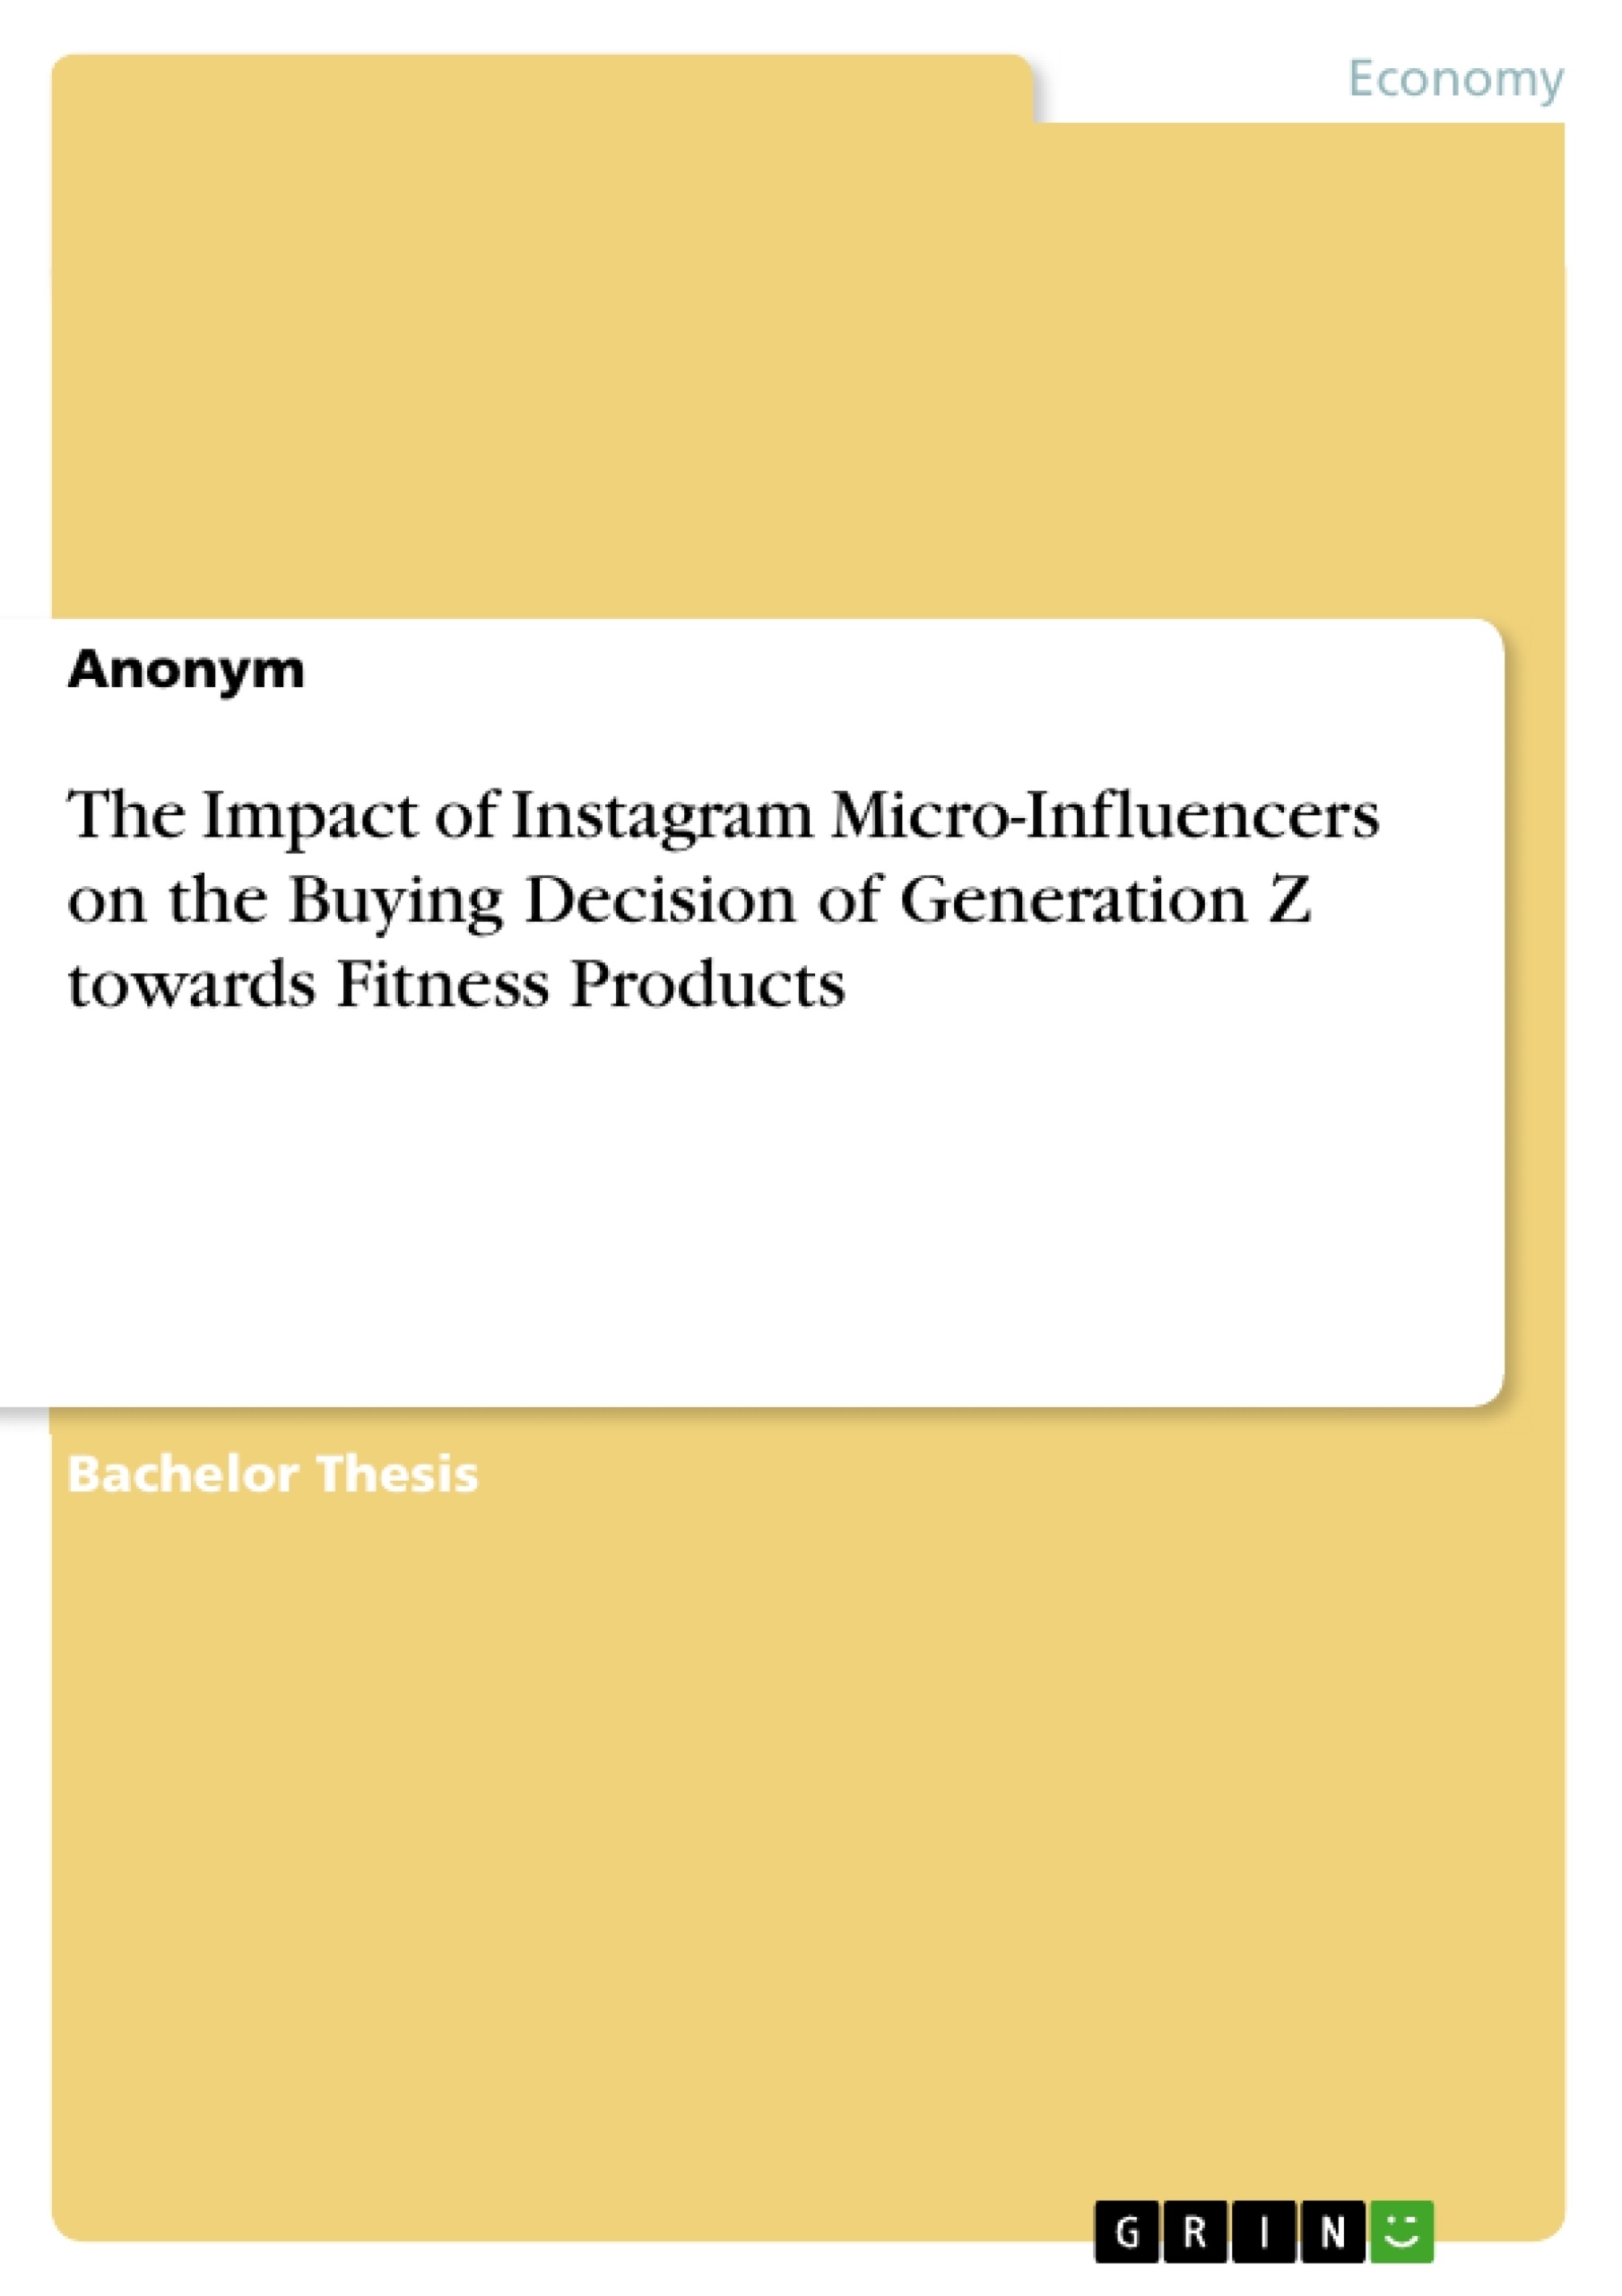 Title: The Impact of Instagram Micro-Influencers on the Buying Decision of Generation Z towards Fitness Products